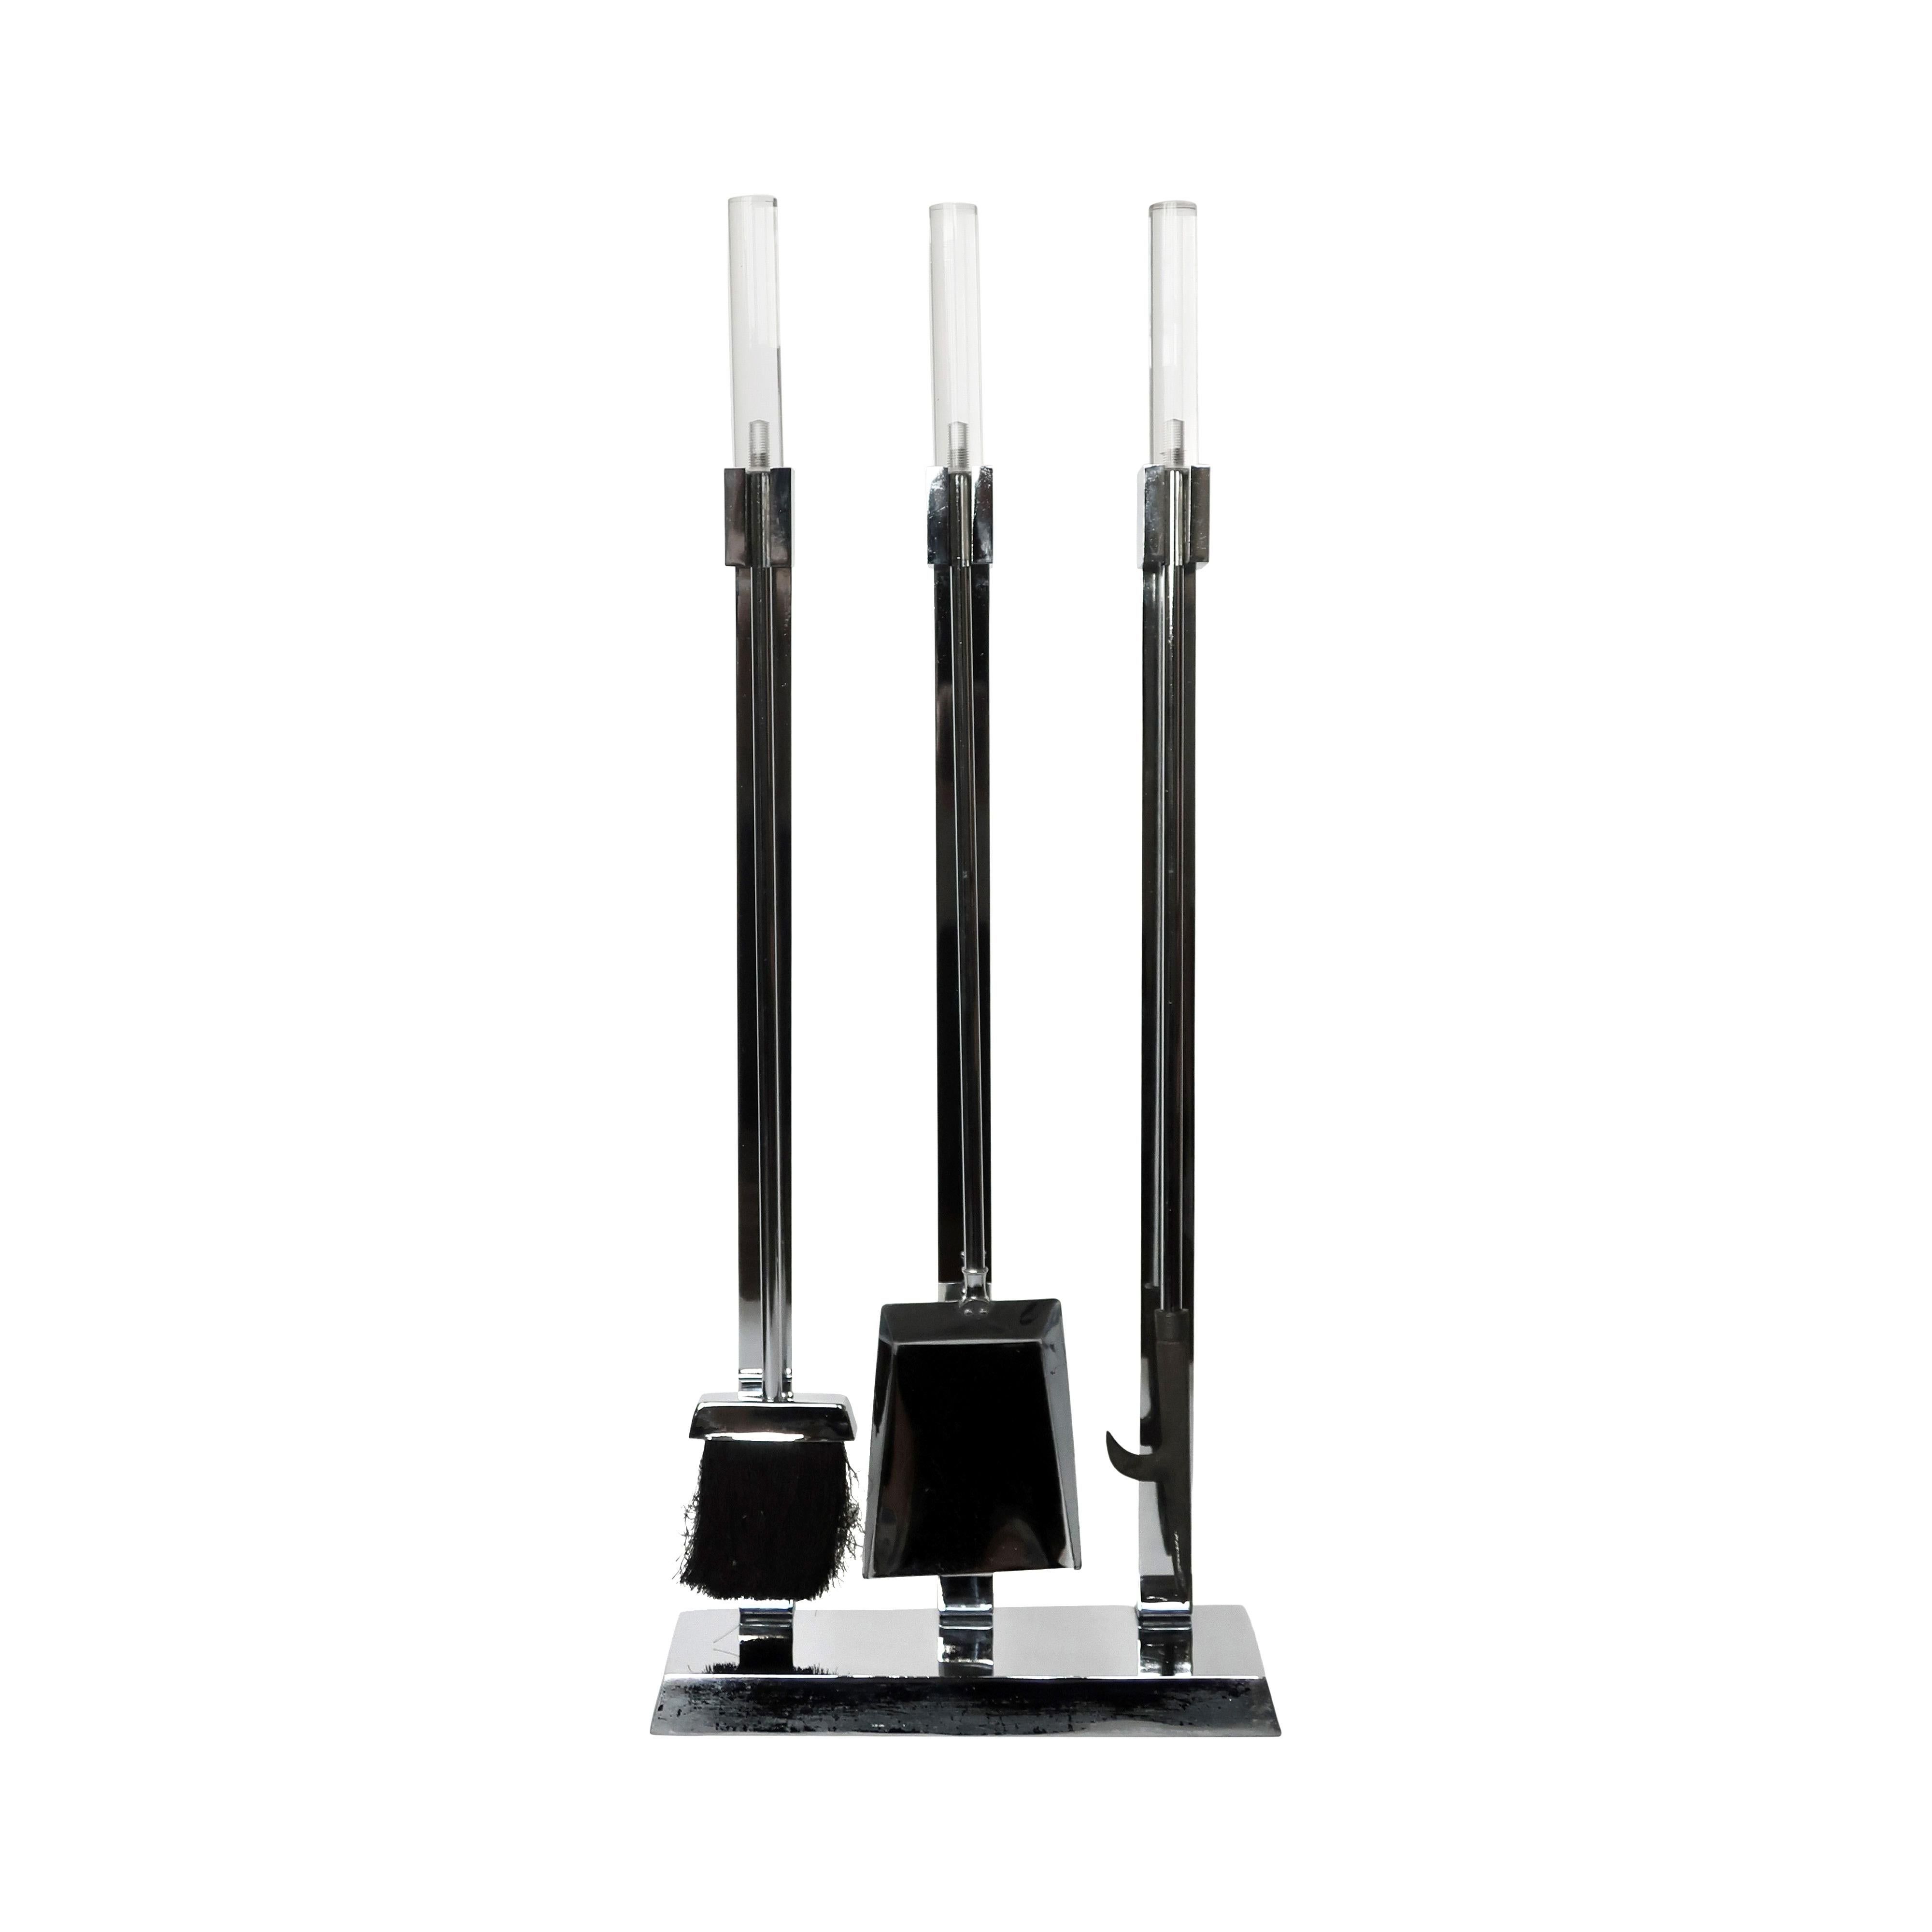 A lovely three piece set of lucite topped chrome fireplace tools that includes a shovel, brush, poker and stand. Each tool is chrome with a cylindrical lucite handle, which rest on the upright stands of the base. In the style of some of the greats